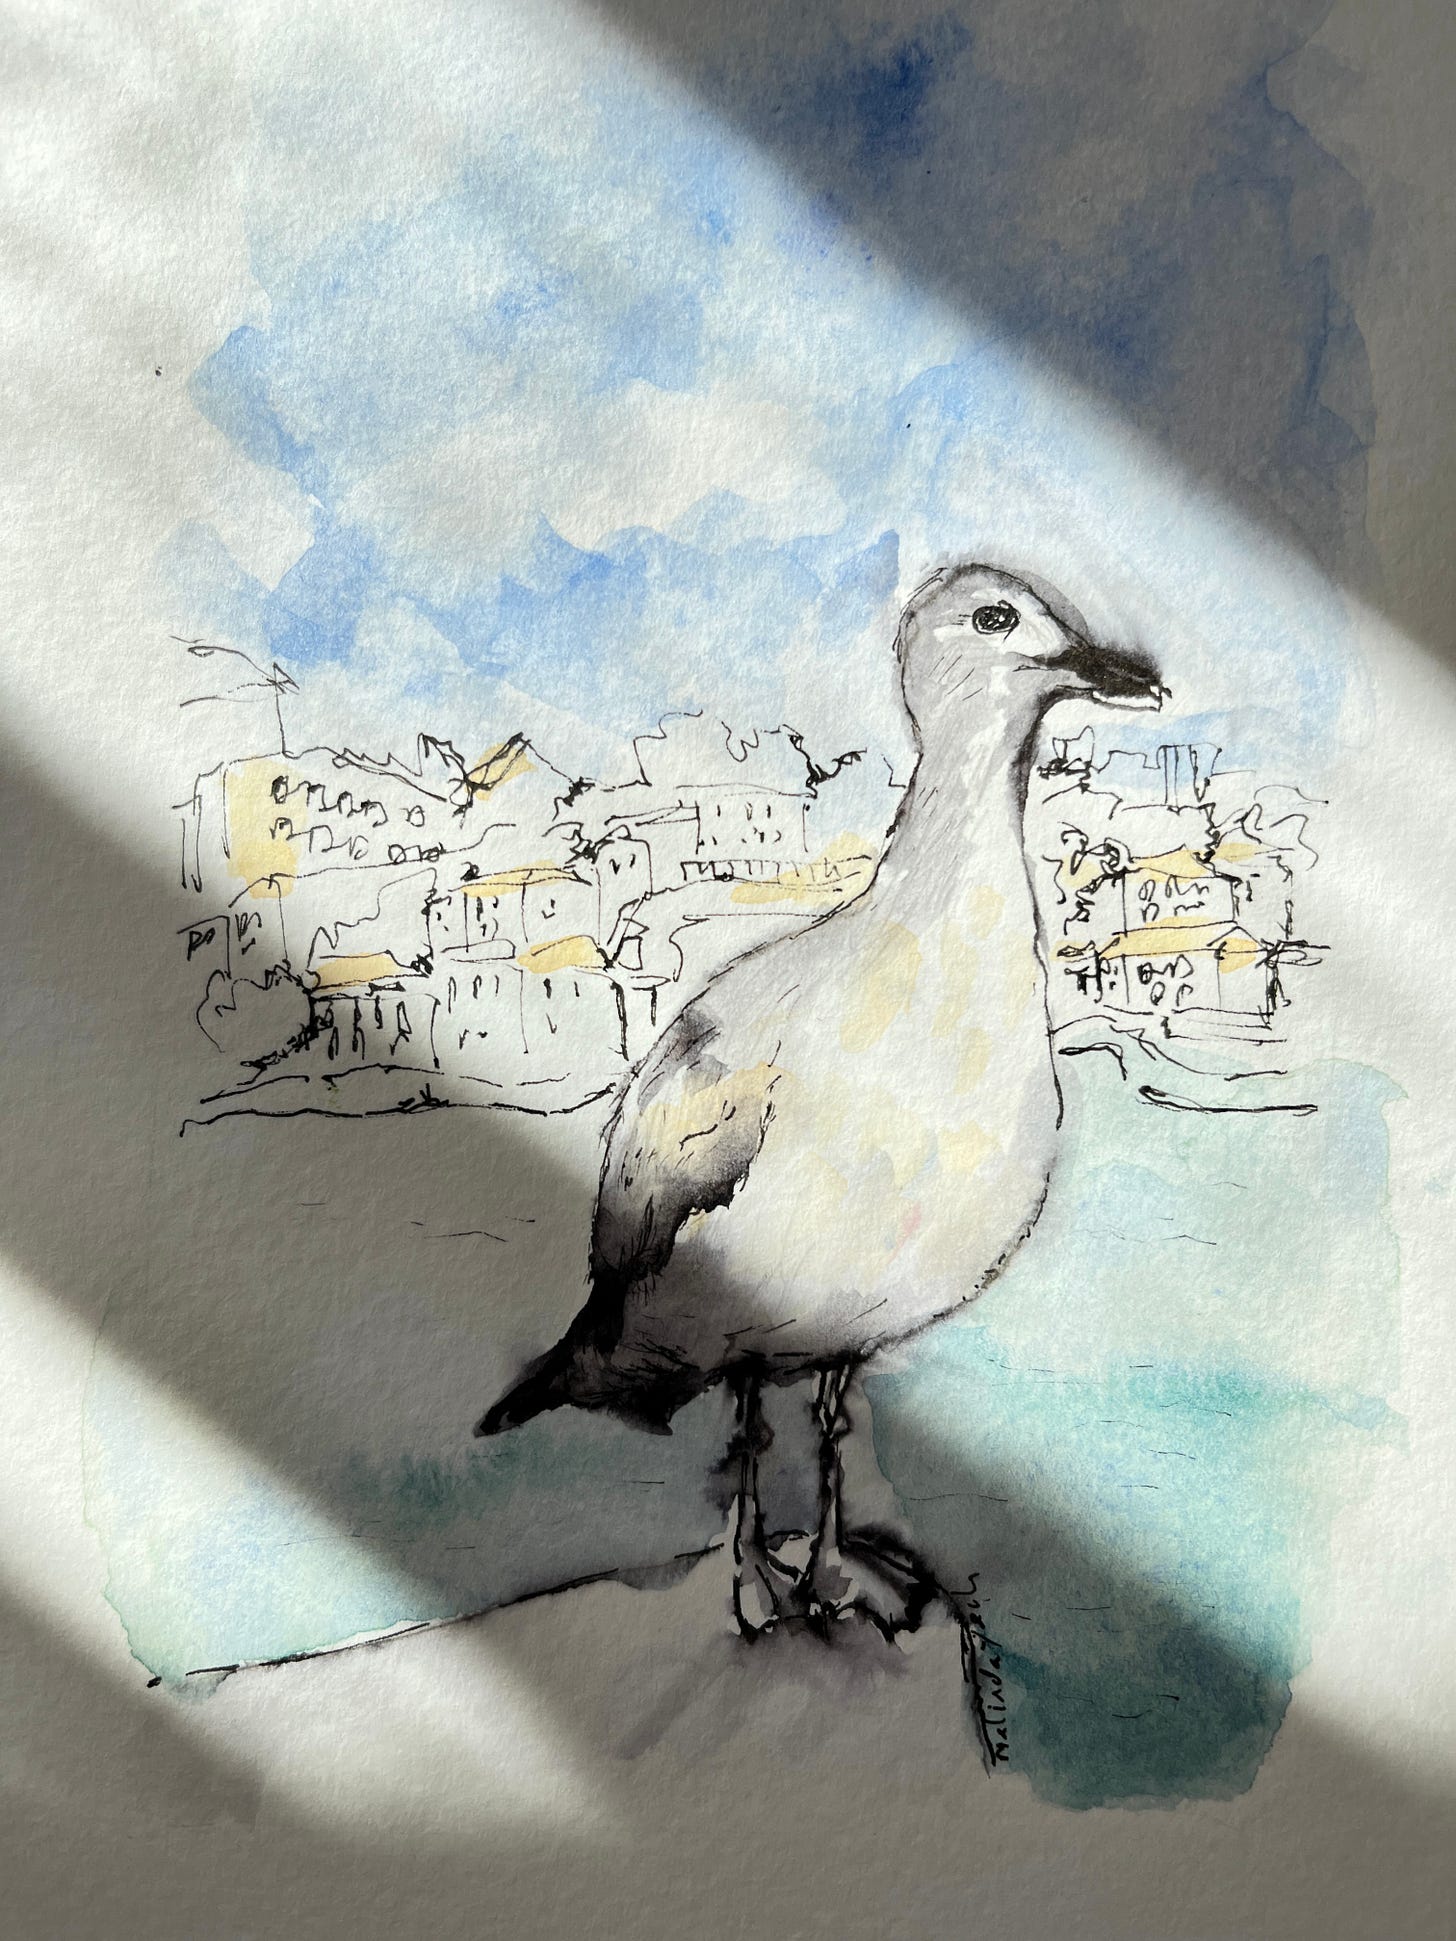 image: ink and watercolour wash painting of a seagull as the focus in the foreground, perched on a structure, the background is Ribeira river with the old charming houses in Gaia.